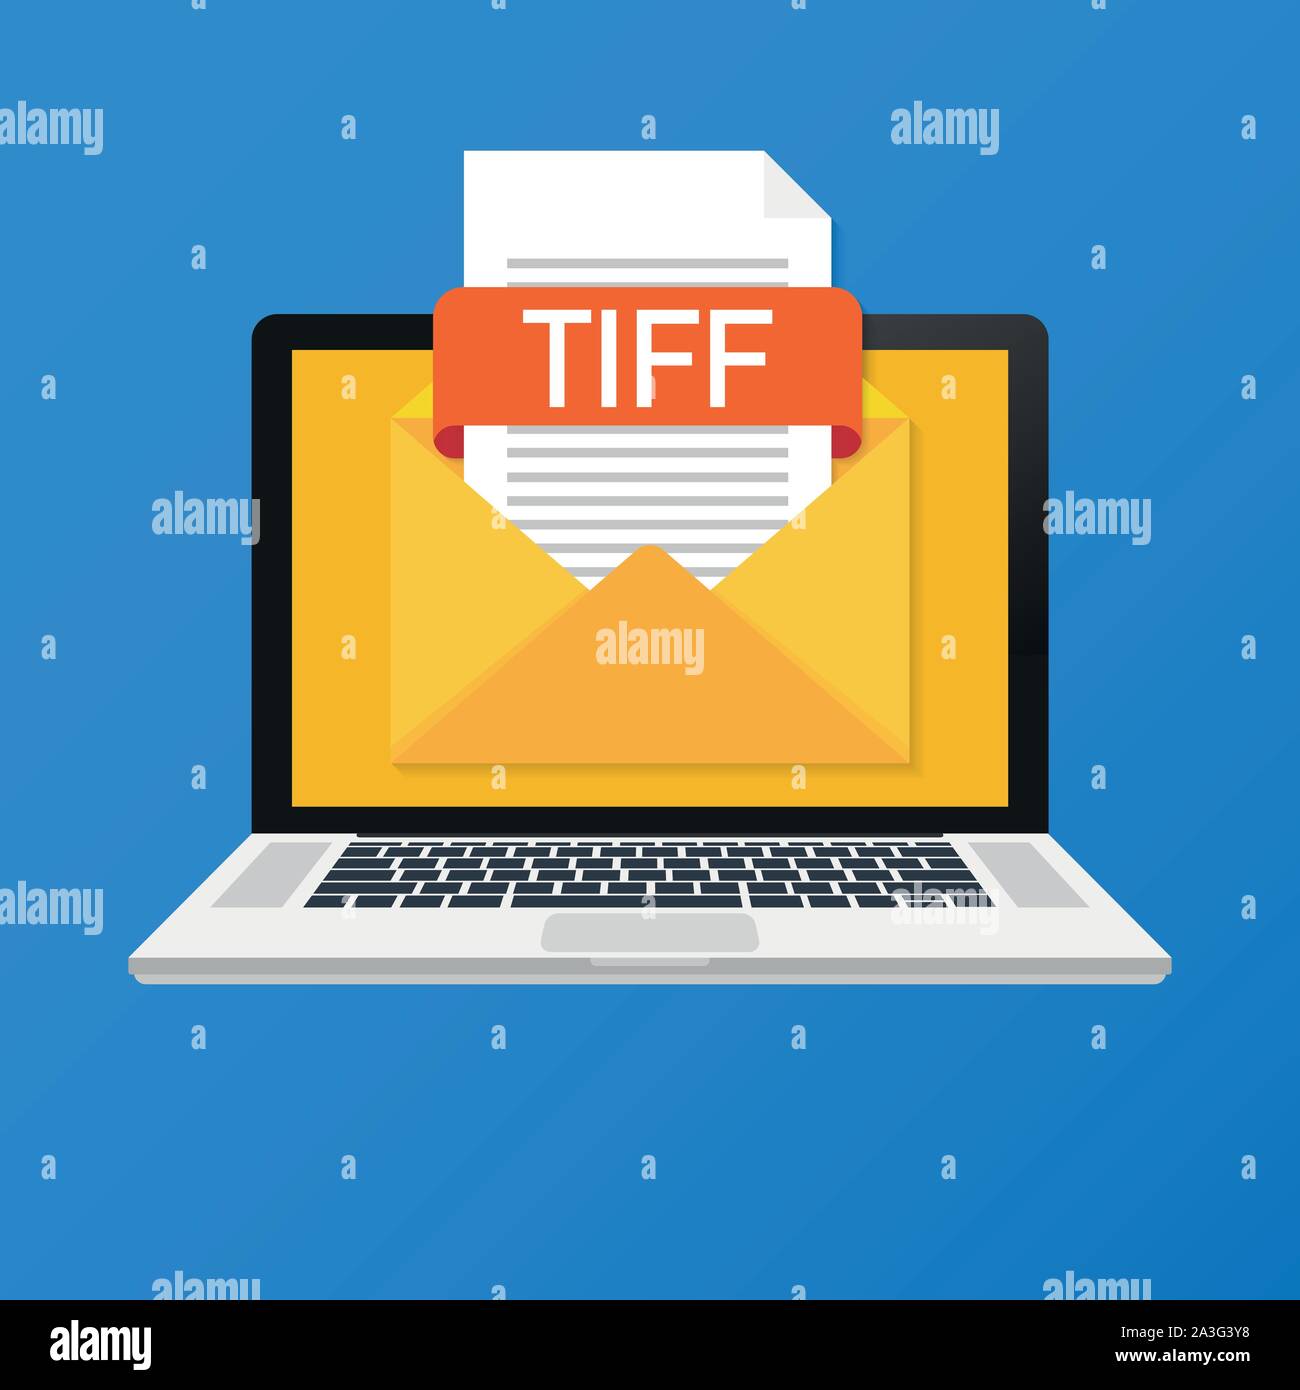 Laptop with envelope and TIFF file. Notebook and email with file attachment TIFF document. Stock Vector